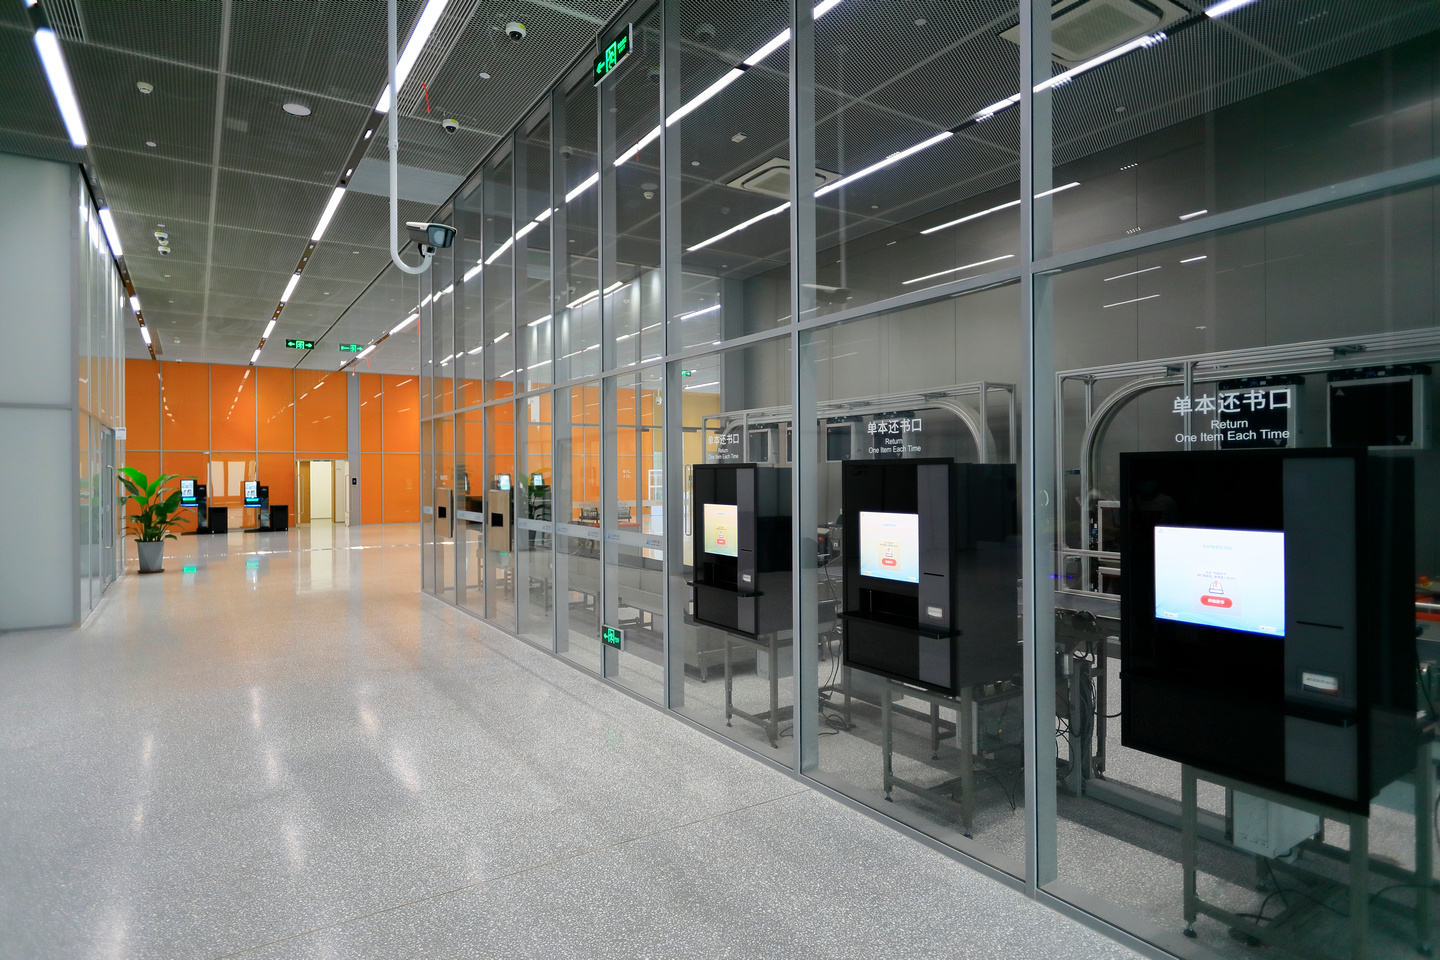 shanghai public library flex amh bookDrops lr | Blending physical and digital library experiences